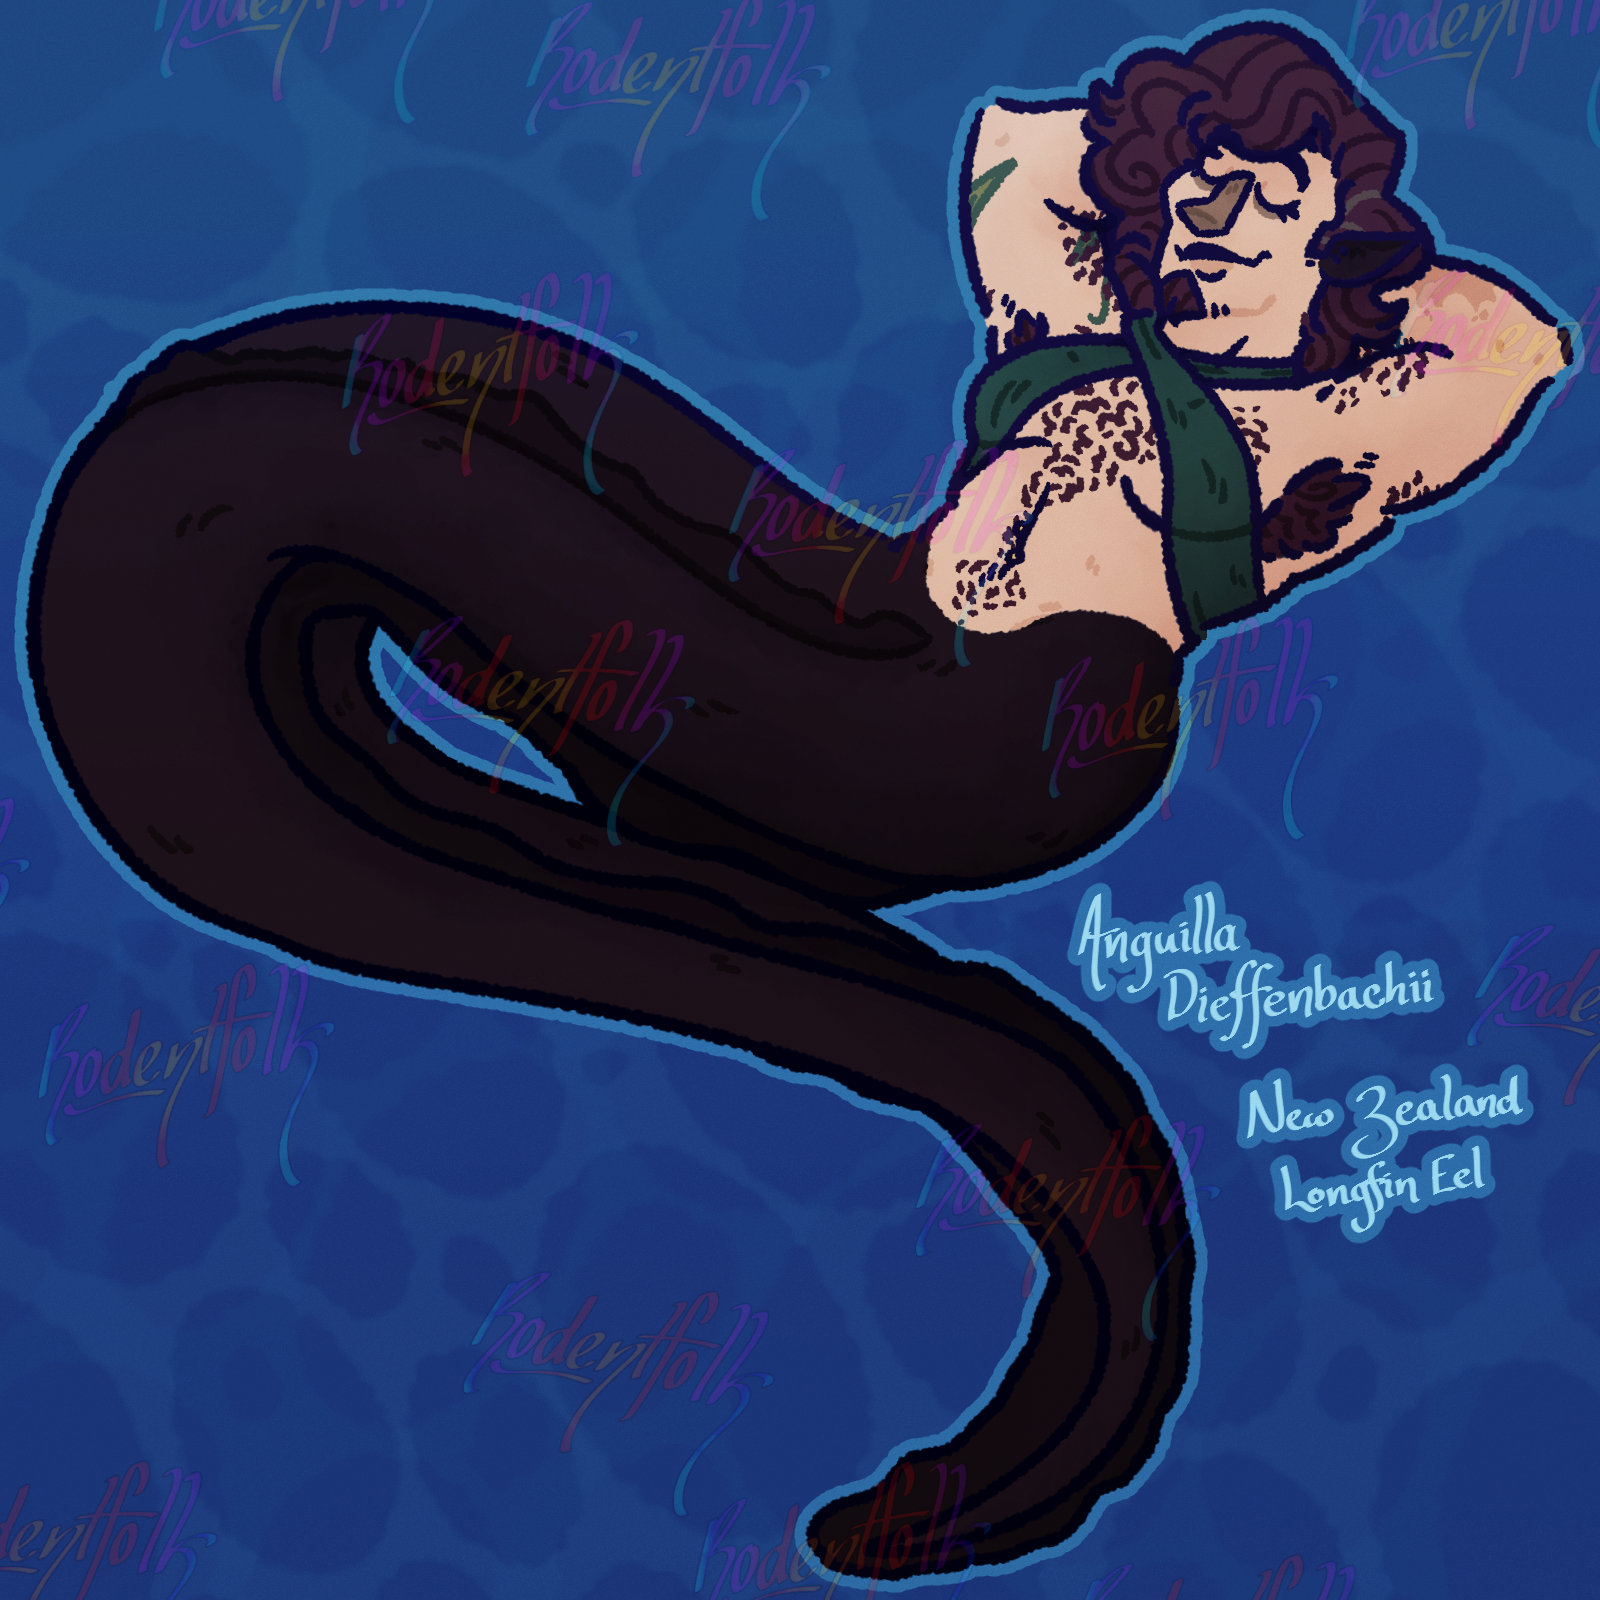 It is a MerMay themed drawing of Nik's OC, Monty, as a mermaid. He's been drawn with the lower-half of a long black eel (Text next to him notes that he has been drawn as a New Zealand Longfin Eel (Anguilla dieffenbachii)). He is wearing a blade of seaweed wrapped around his neck and chest. He has his hands behind his head and has his eyes closed peacefully.